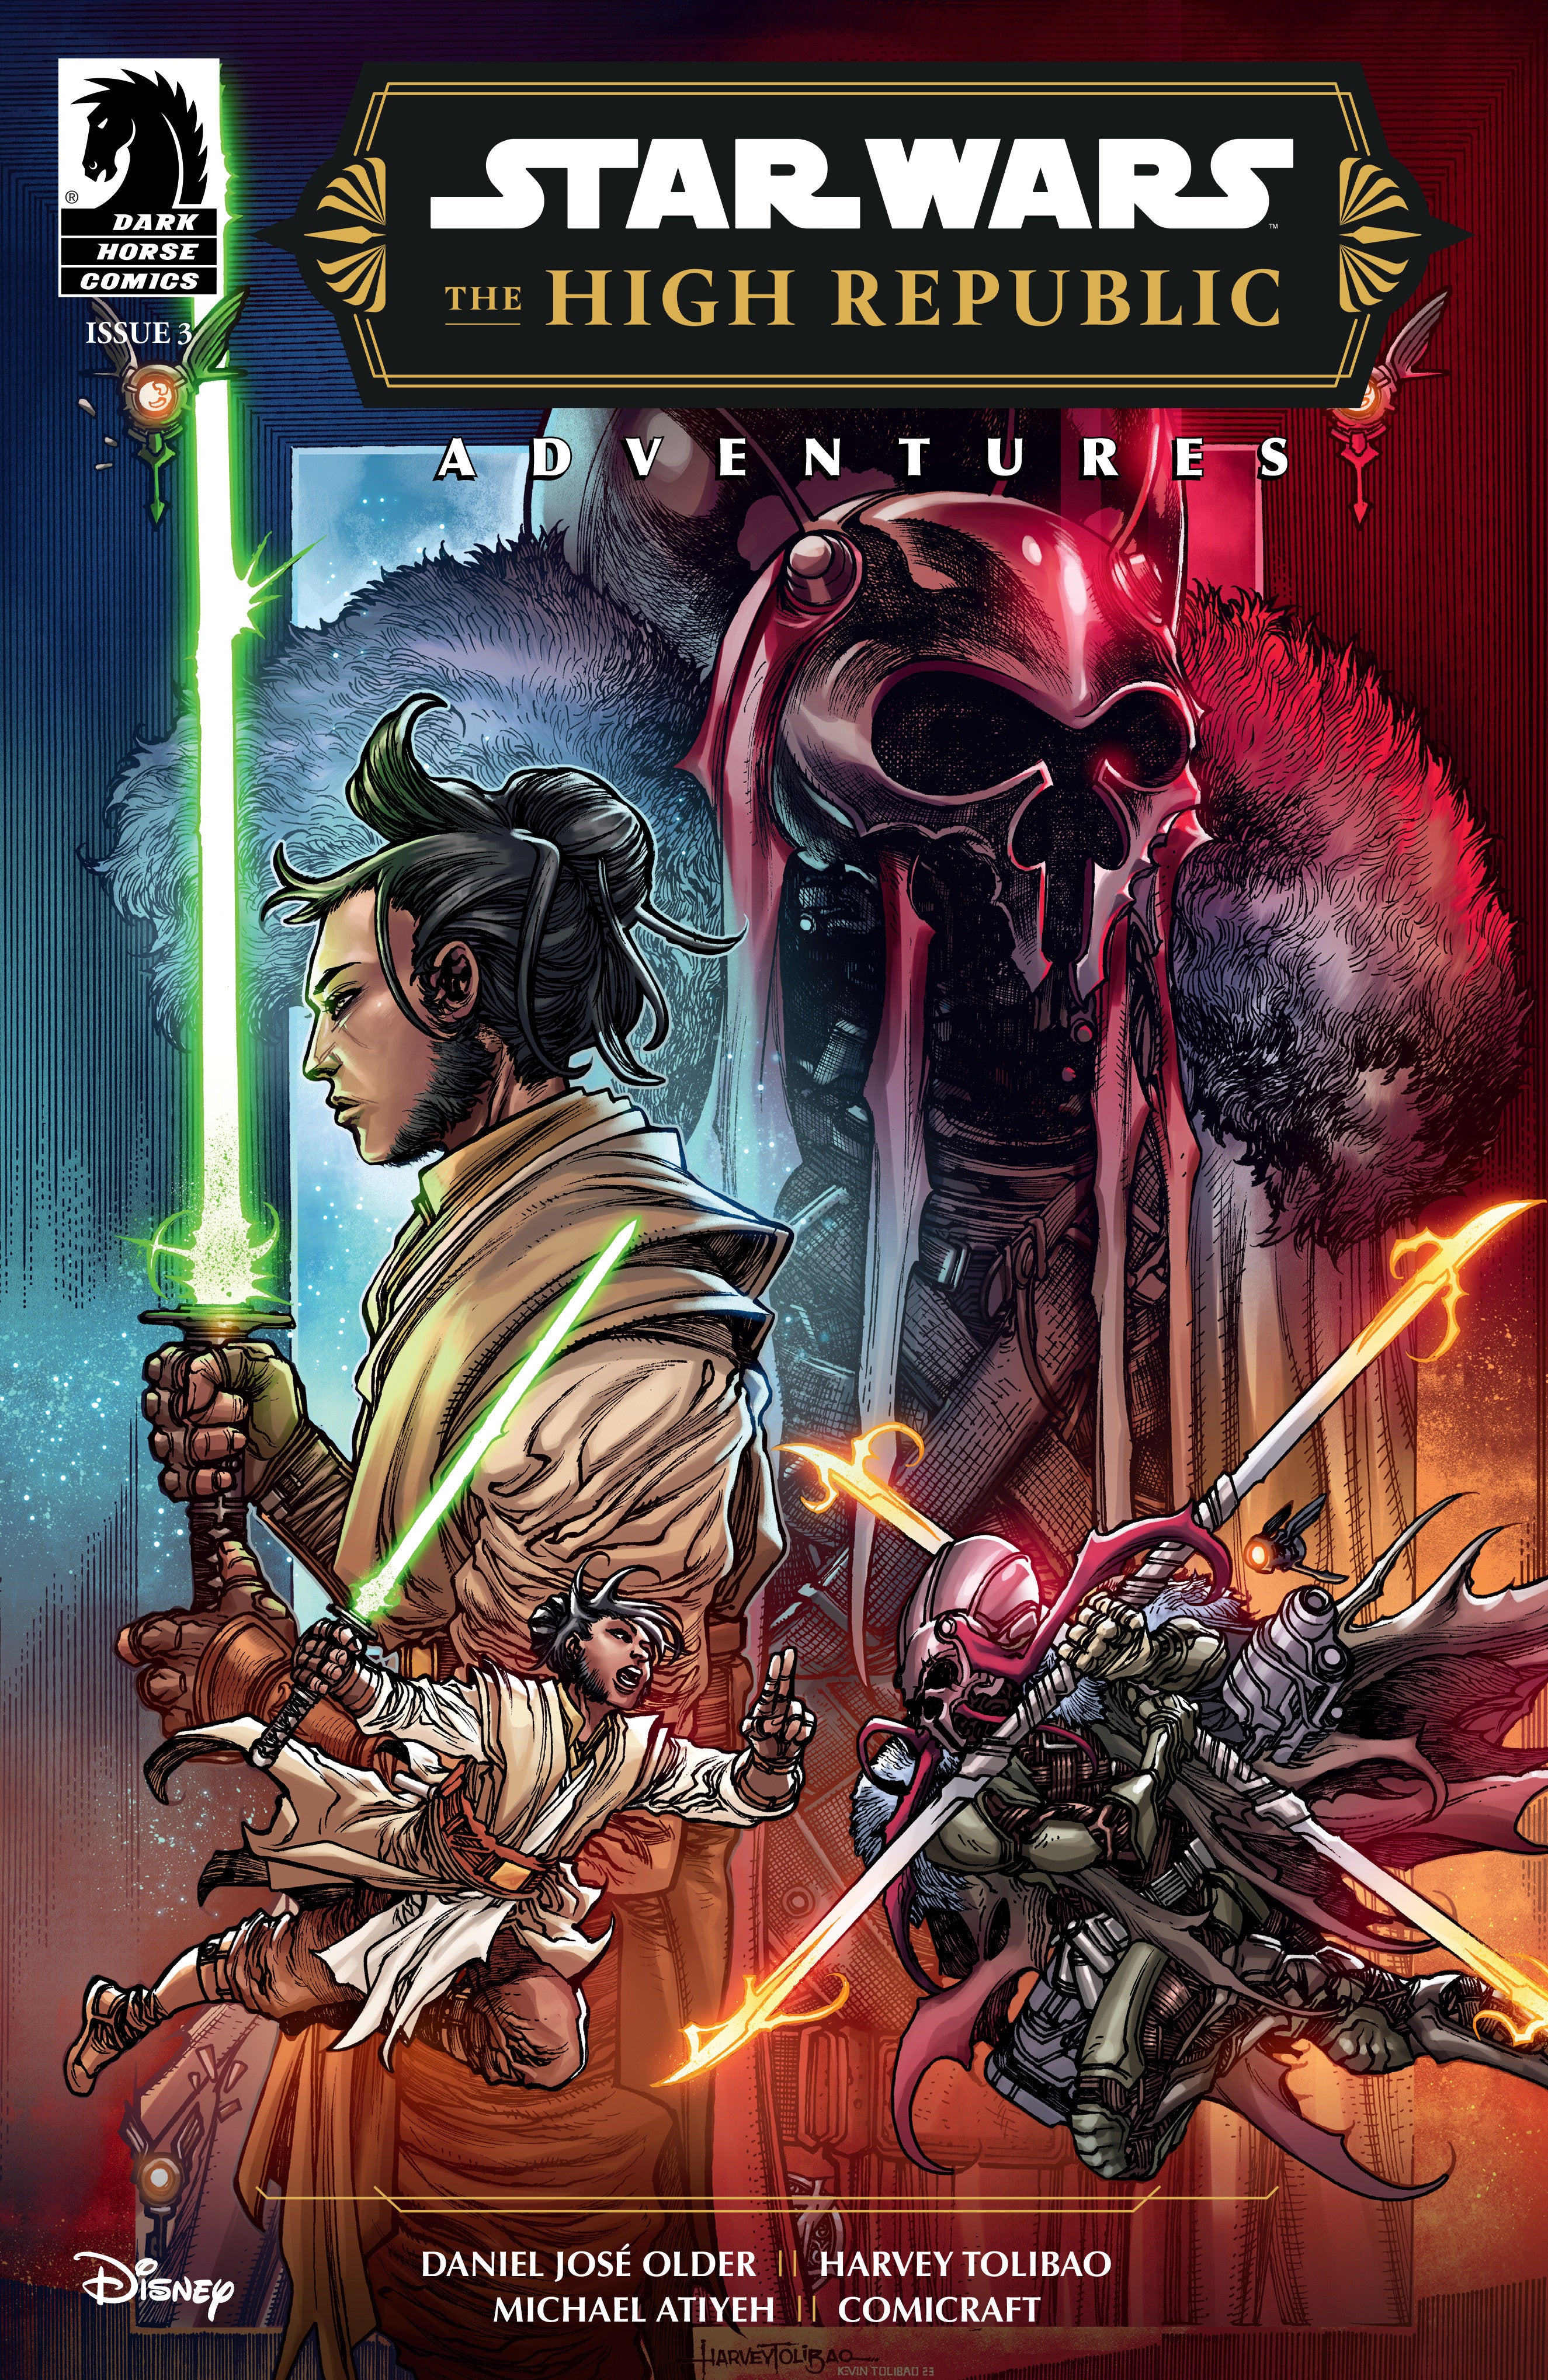 Star Wars: The High Republic Adventures Phase III #3 (Cover A) (Harvey Tolibao) | Game Master's Emporium (The New GME)